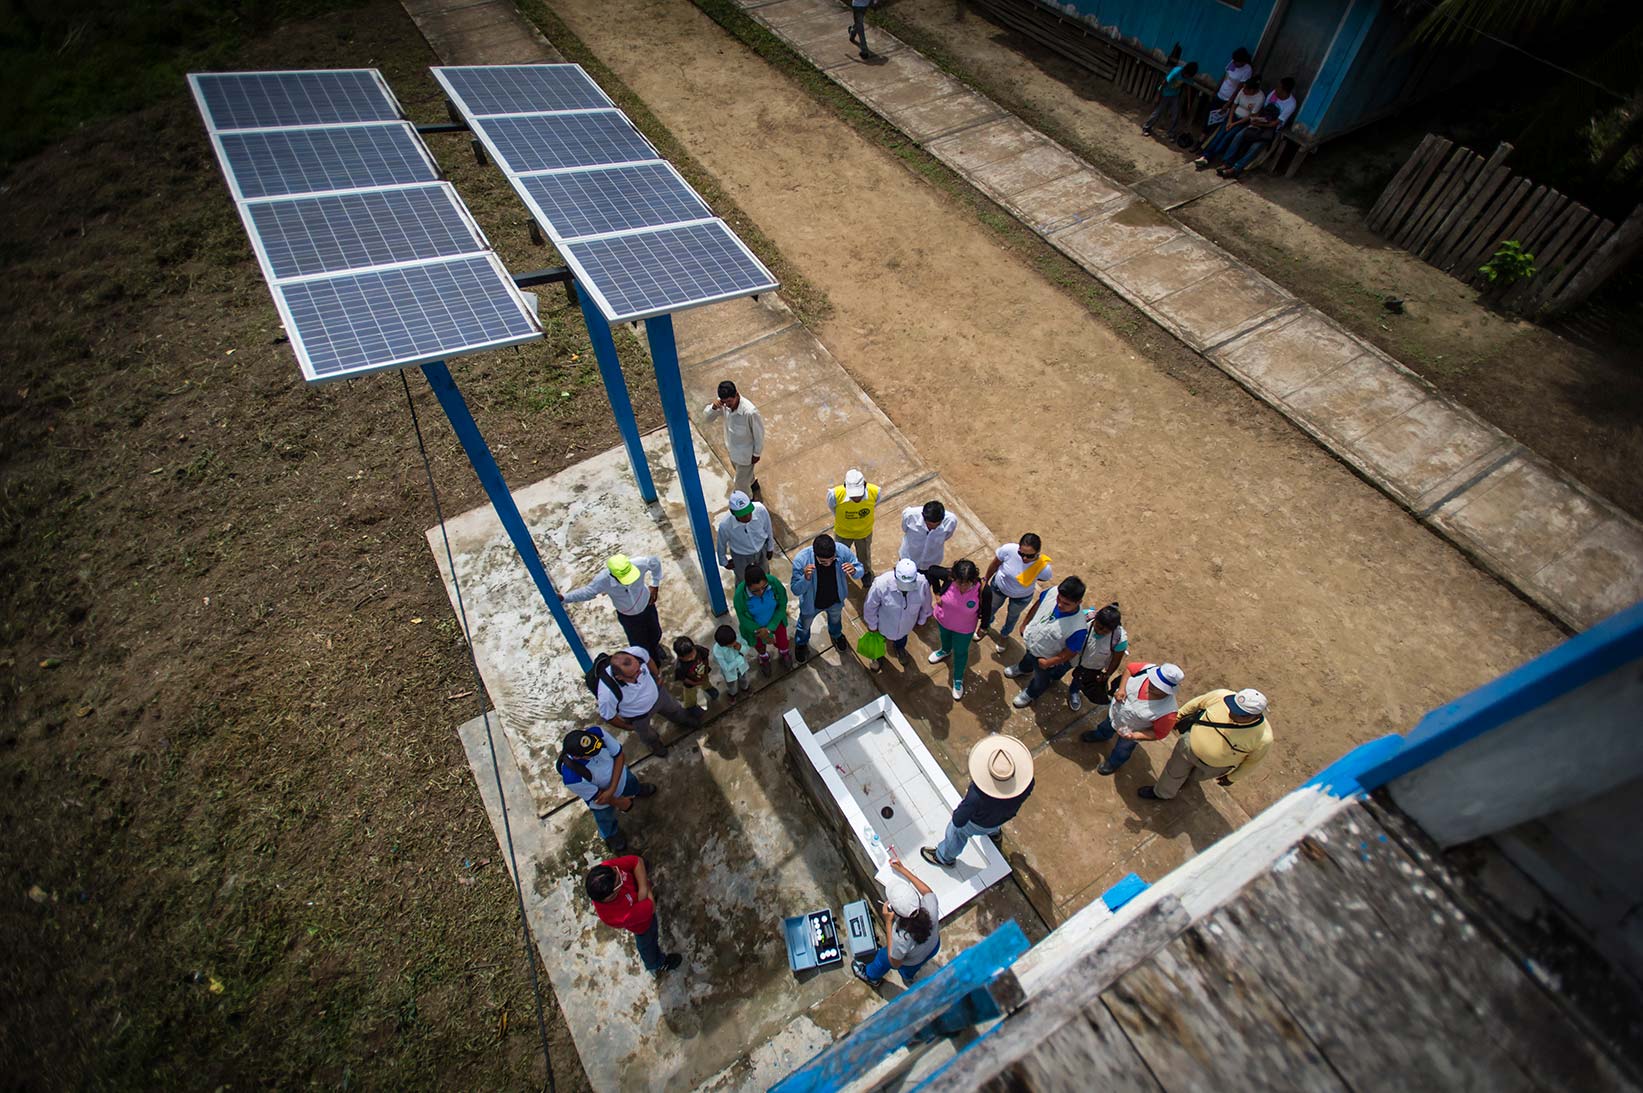 Solar panels power the safe water treatment system for Segundo and his family.